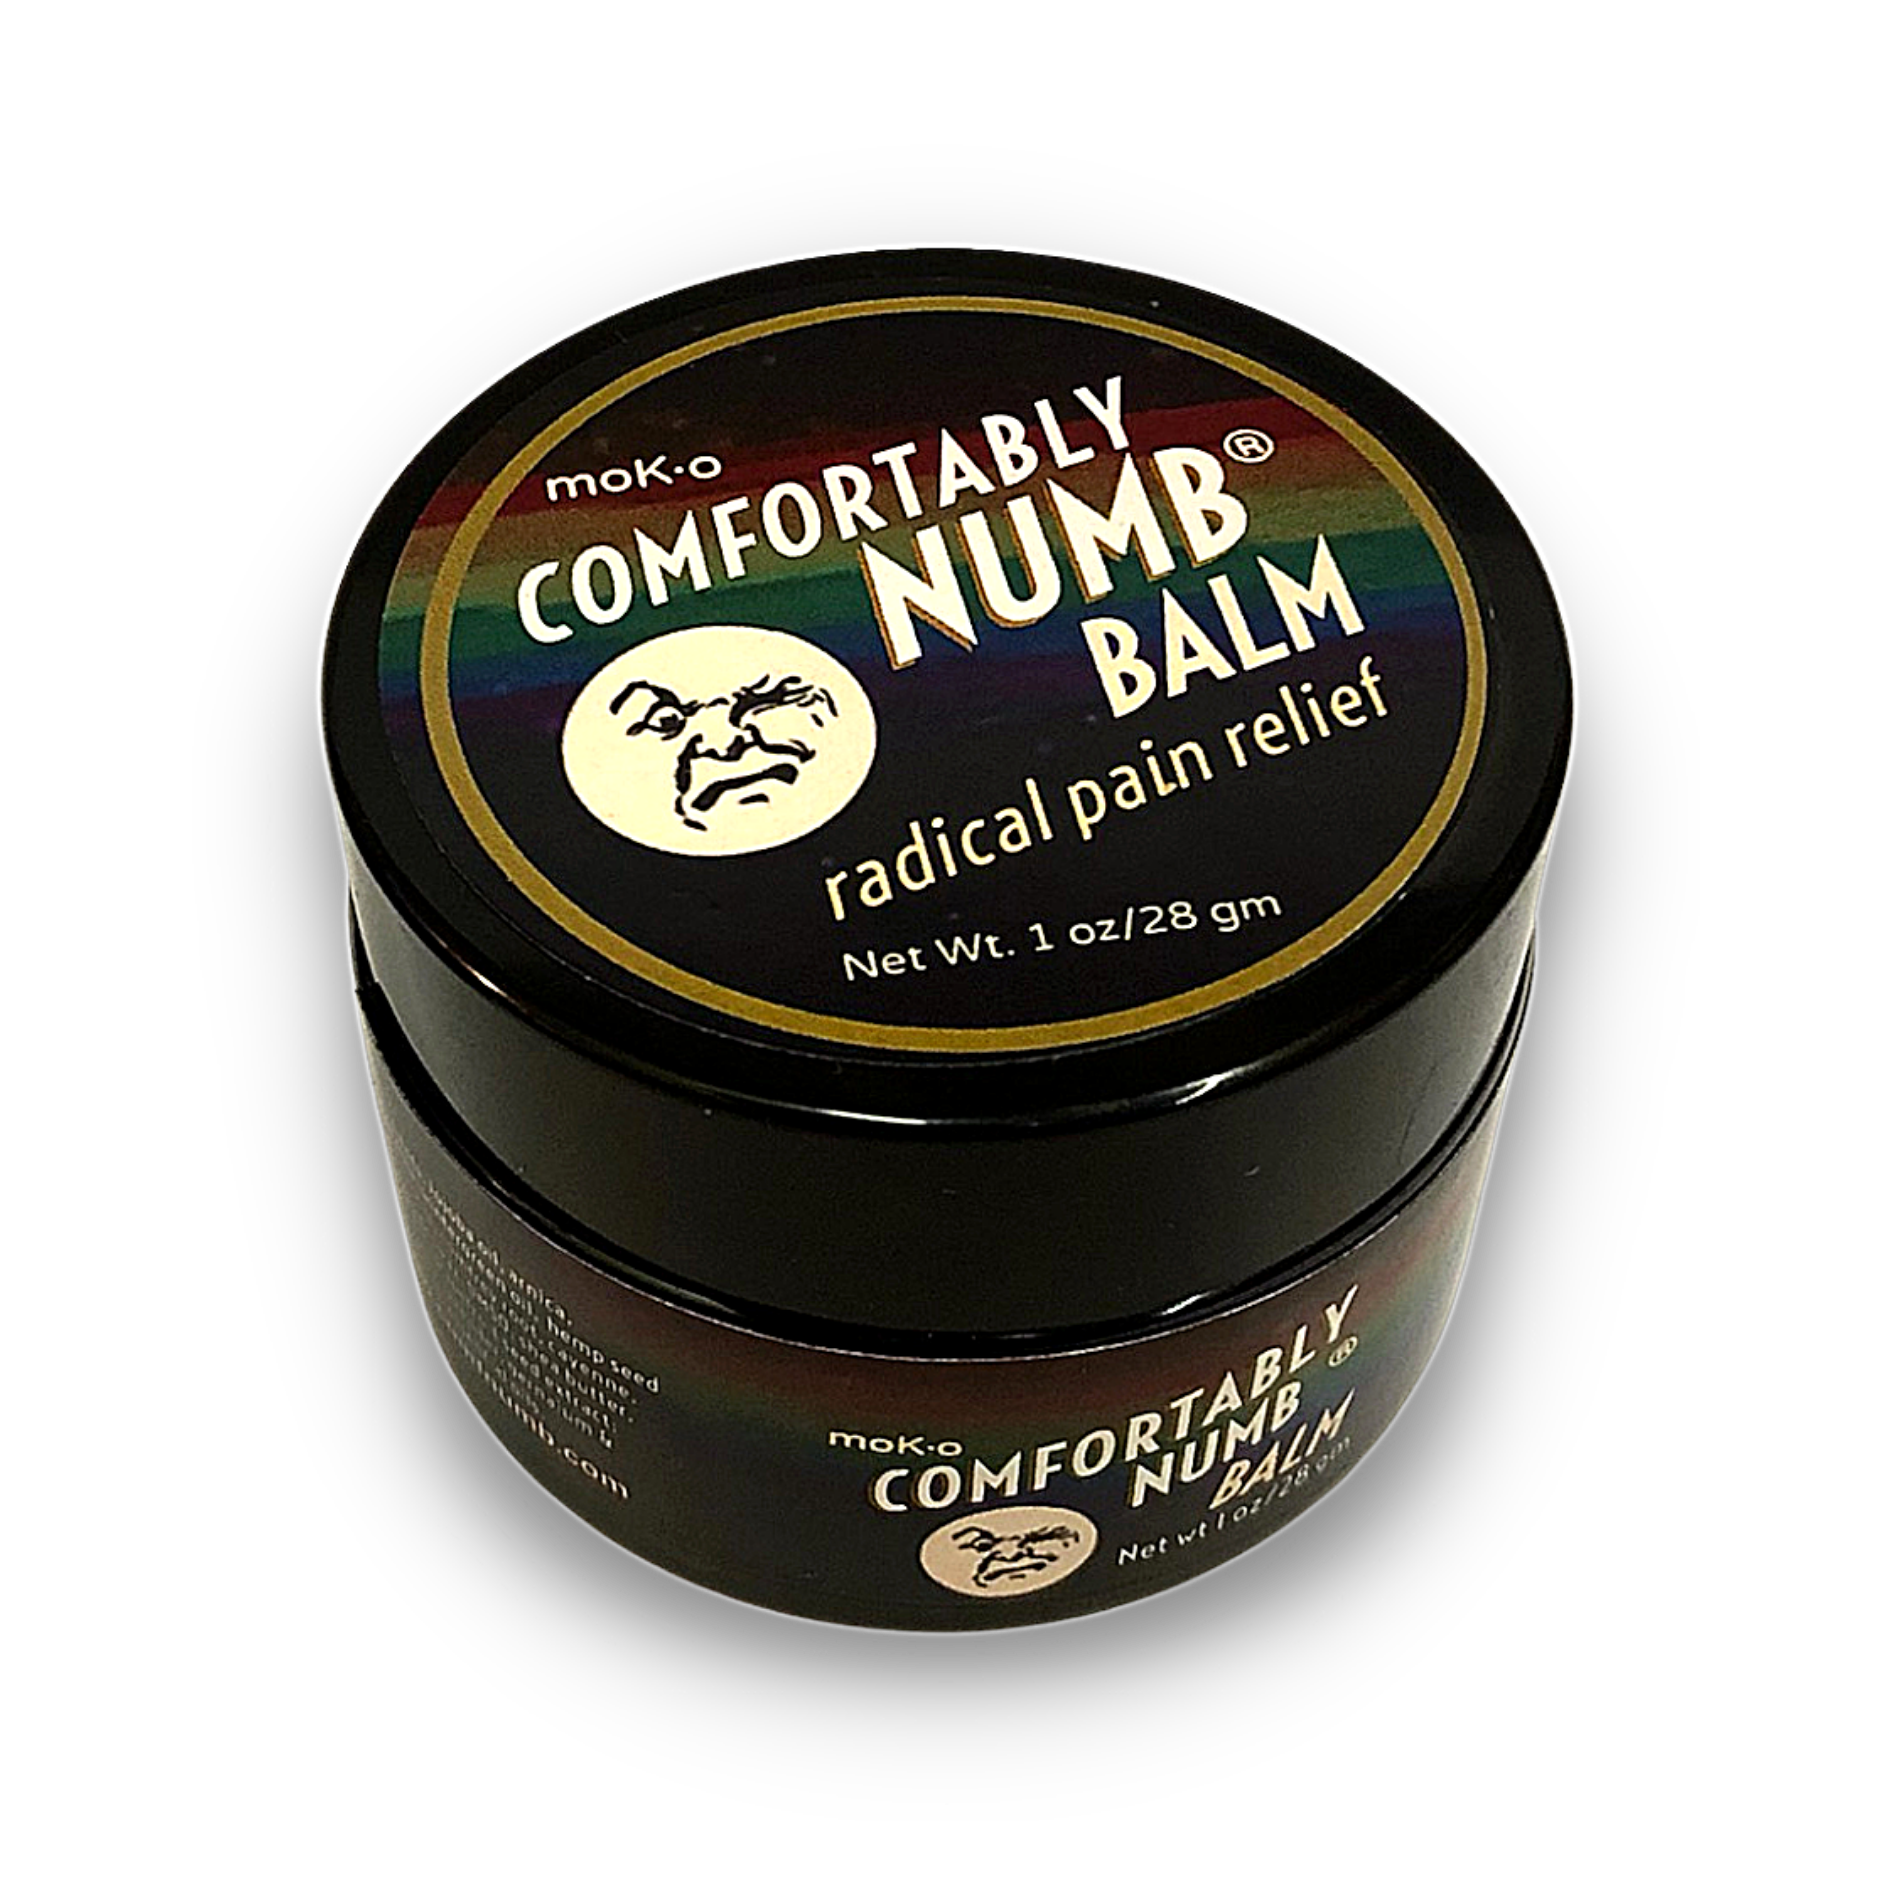 The organically-infused original powerful formulation of Comfortably Numb® with cooling analgesics, some pain-reducing, numbing & cellular-repairing amazement, throw in some therapeutic-grade essential oils, then top it off with a deep tissue, muscle & joint penetration ingredient, you have a balm that will absolutely blow your mind.